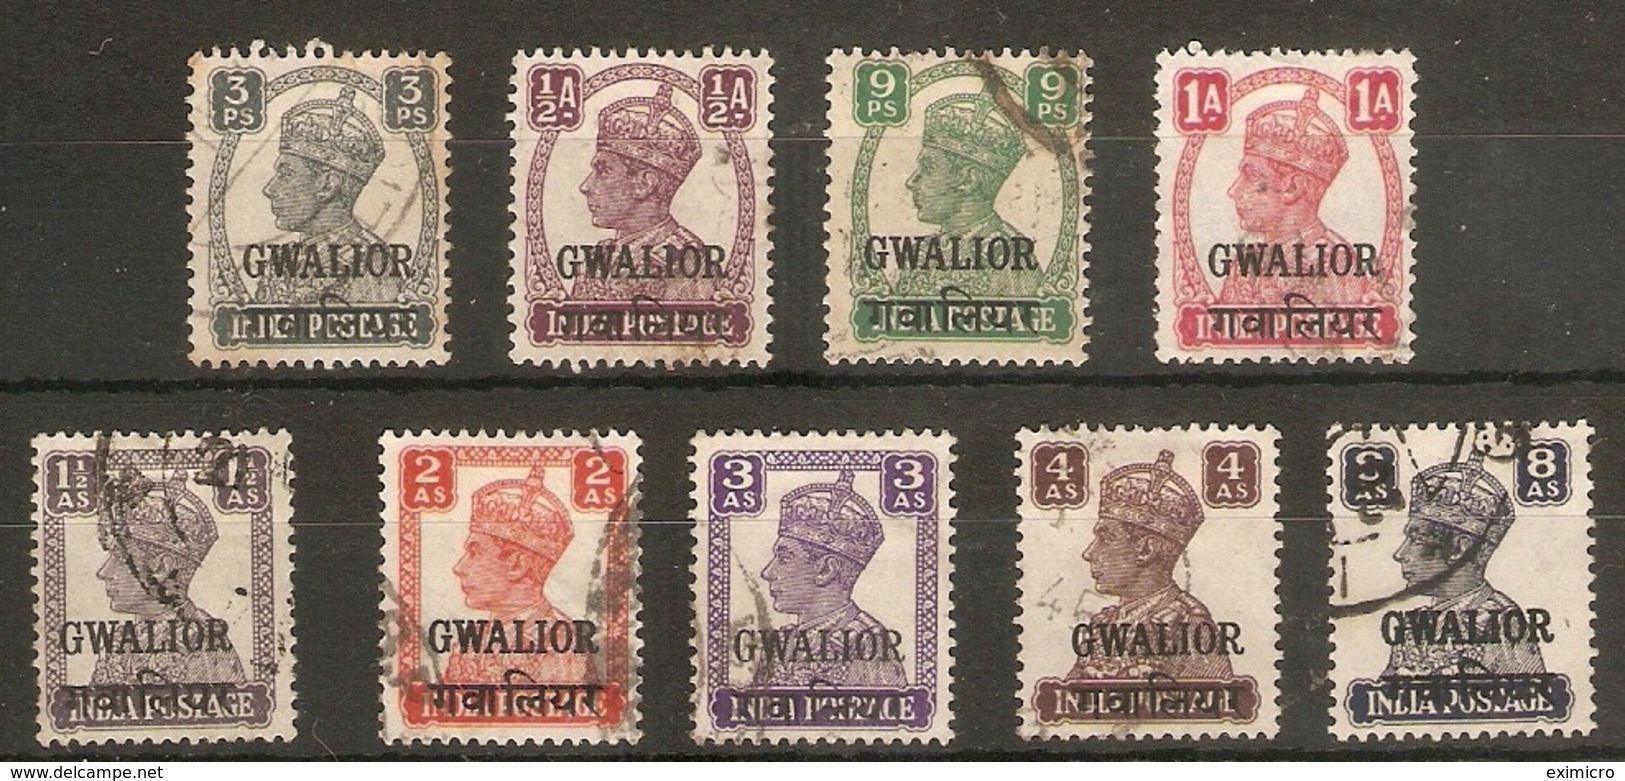 INDIA - GWALIOR 1942 - 1945 VALUES TO 8a BETWEEN SG 118 And SG 127 FINE USED Cat £6.80 - Gwalior